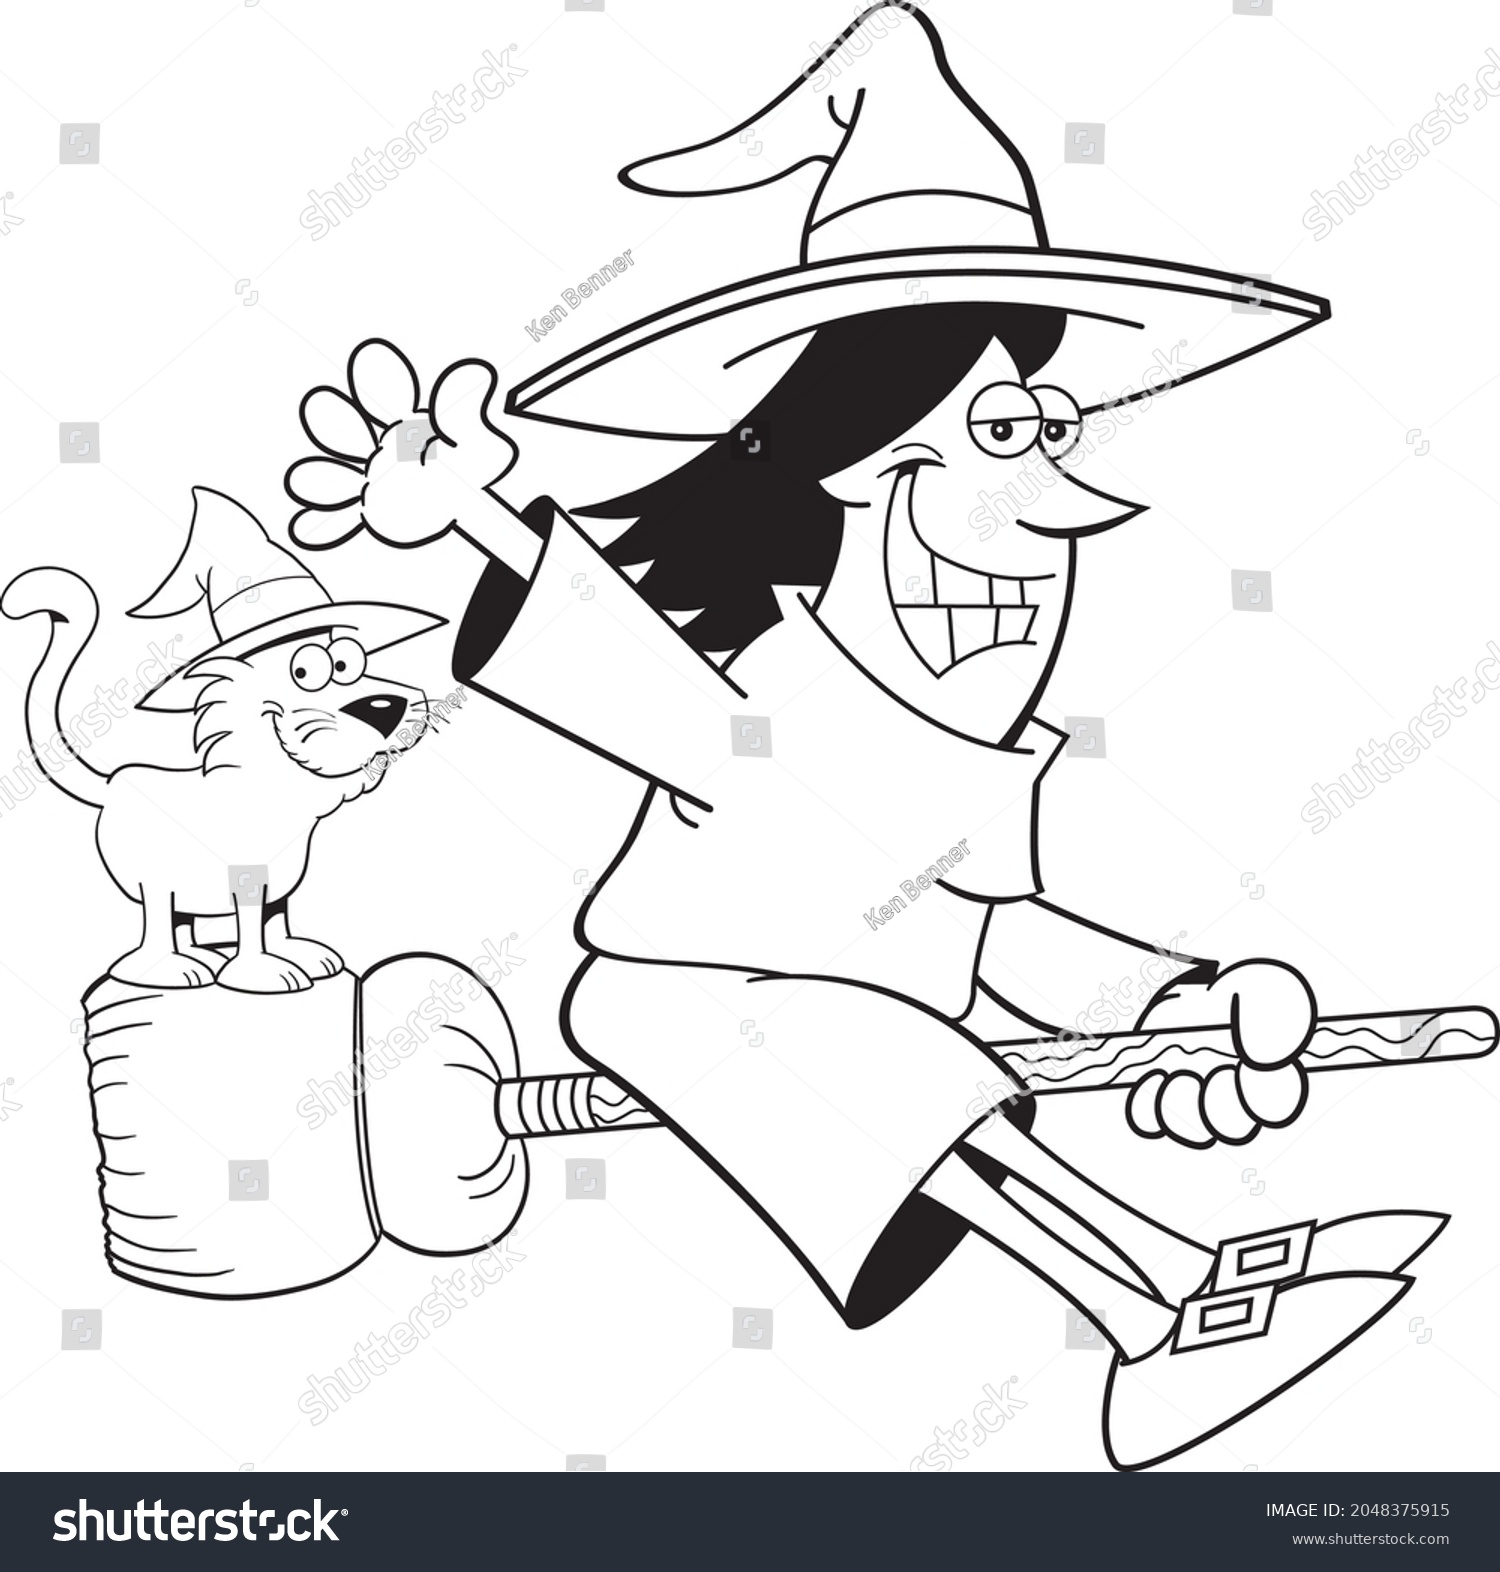 Black White Illustration Witch Riding Broom Stock Vector Royalty Free 2048375915 Shutterstock 